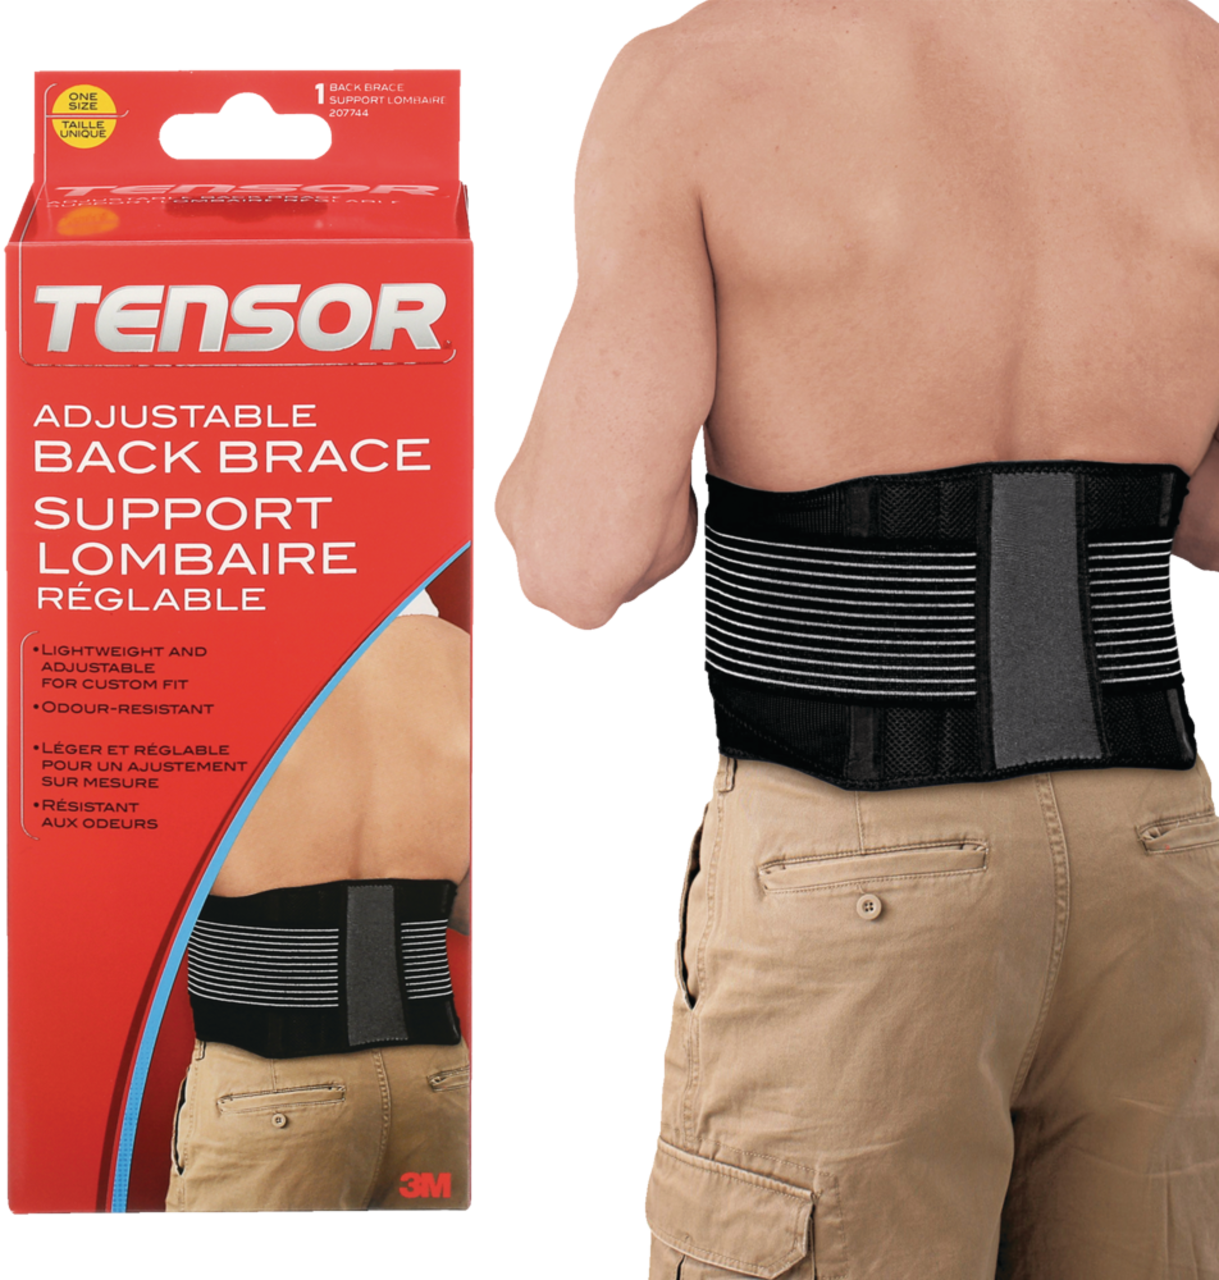 https://media-www.canadiantire.ca/product/playing/hockey/hockey-accessories/0839168/tensor-adjustable-back-brace-one-size-fits-all--ce247b11-eb20-4606-9590-aa0a3ac12142.png?imdensity=1&imwidth=1244&impolicy=mZoom